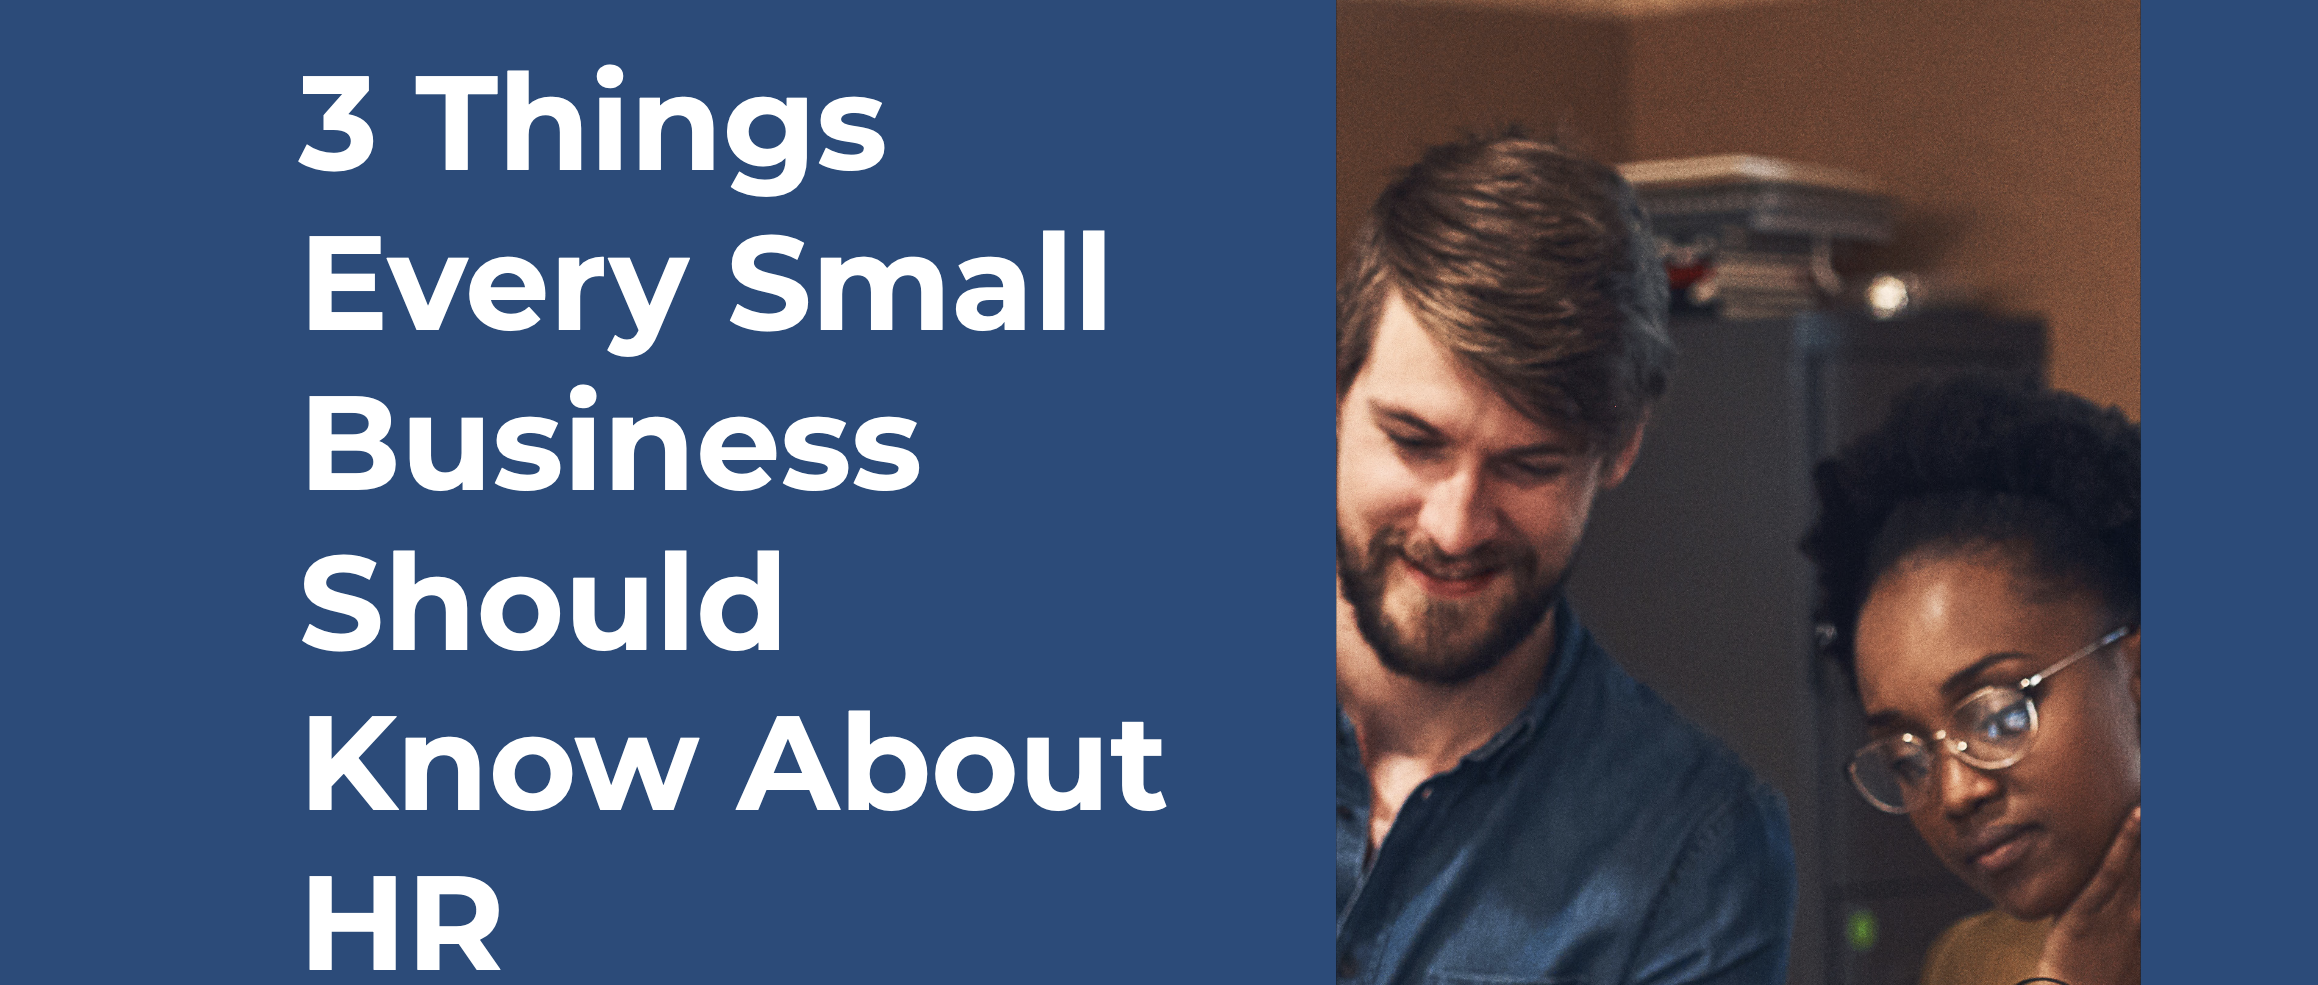 3 Things Every Small Business Should Know About HR